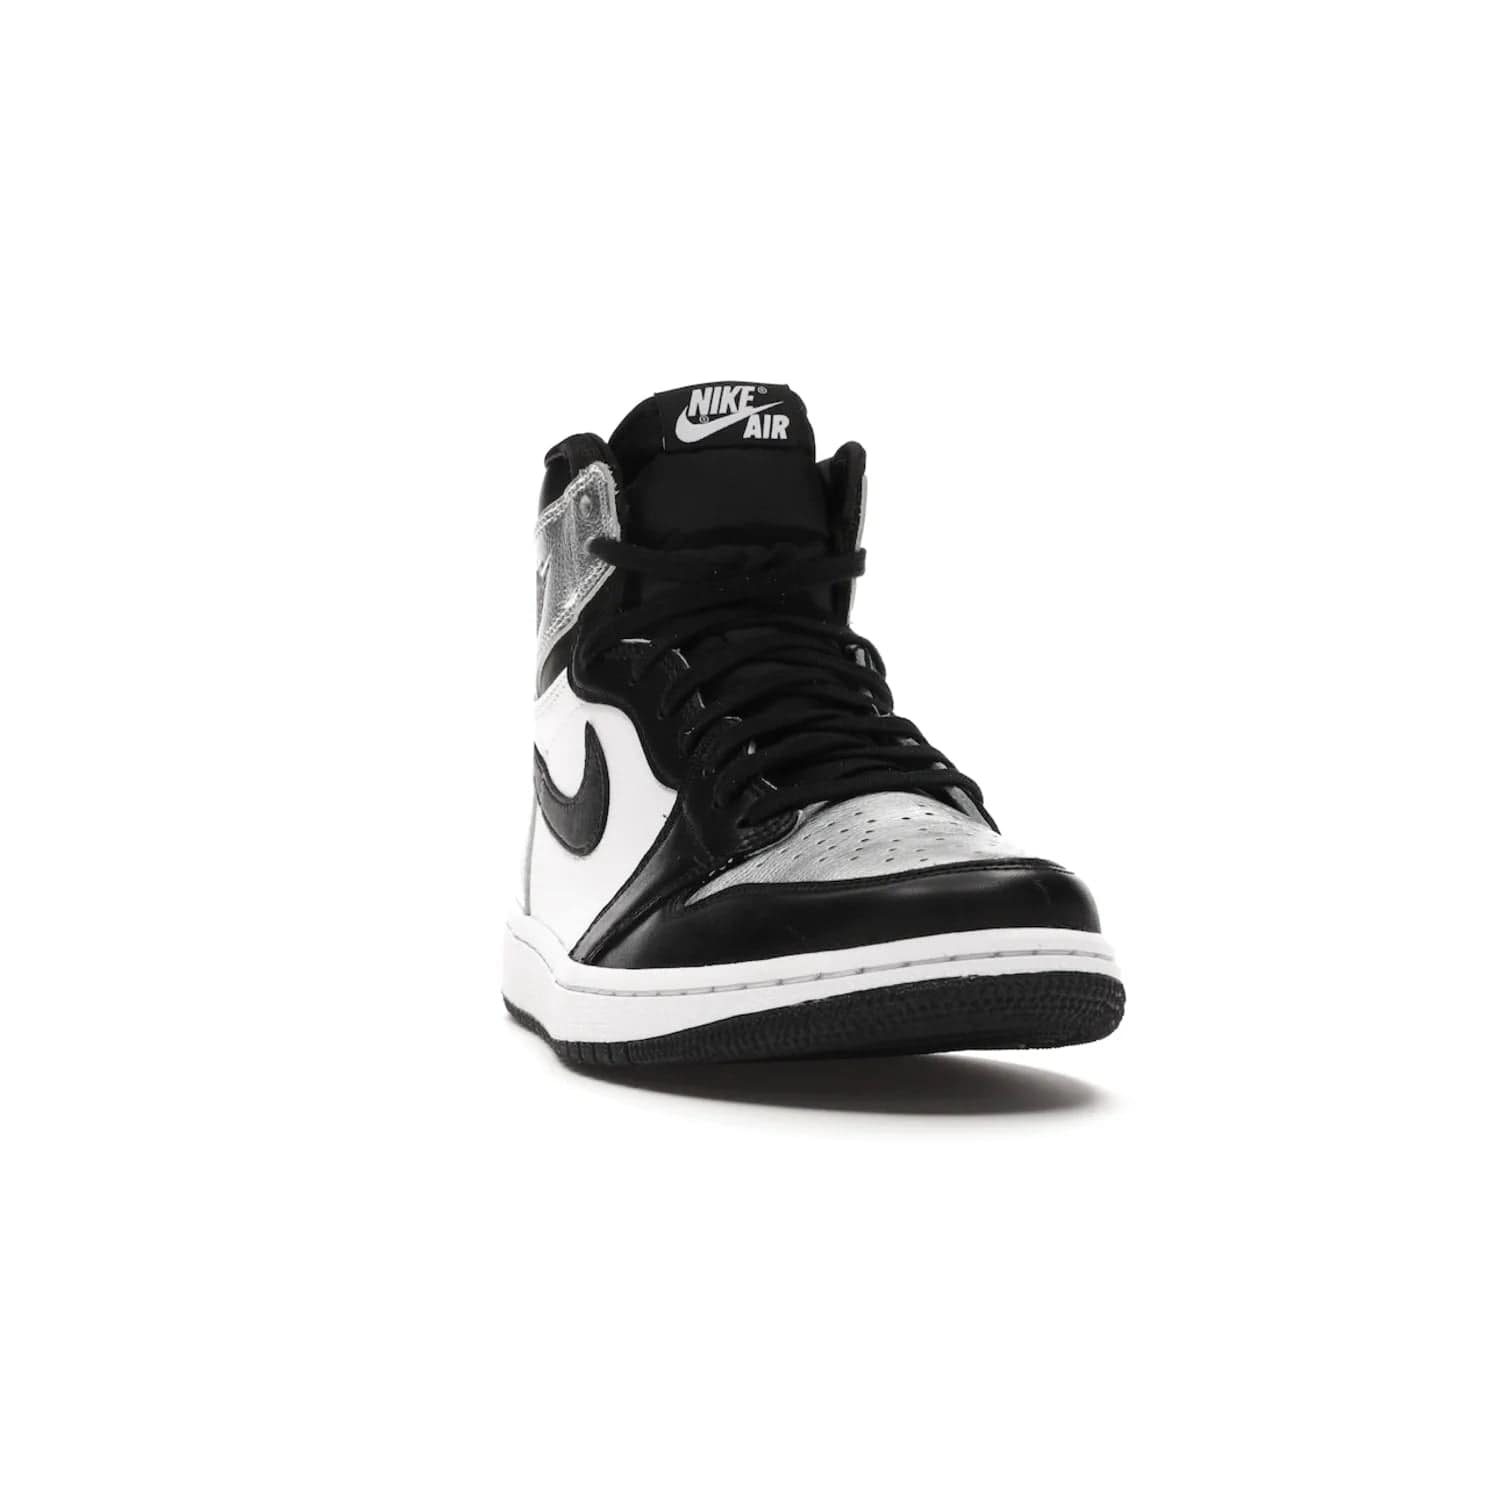 Jordan 1 Retro High Silver Toe (Women's) - Image 8 - Only at www.BallersClubKickz.com - Introducing the Jordan 1 Retro High Silver Toe (Women's): an updated spin on the iconic 'Black Toe' theme. Featuring white & black leather and silver patent leather construction. Nike Air branding, Air Jordan Wings logo, and white/black sole finish give a classic look. The perfect addition to an on-trend streetwear look. Available in classic black & white, this Jordan 1 is an instant classic. Released in February 202